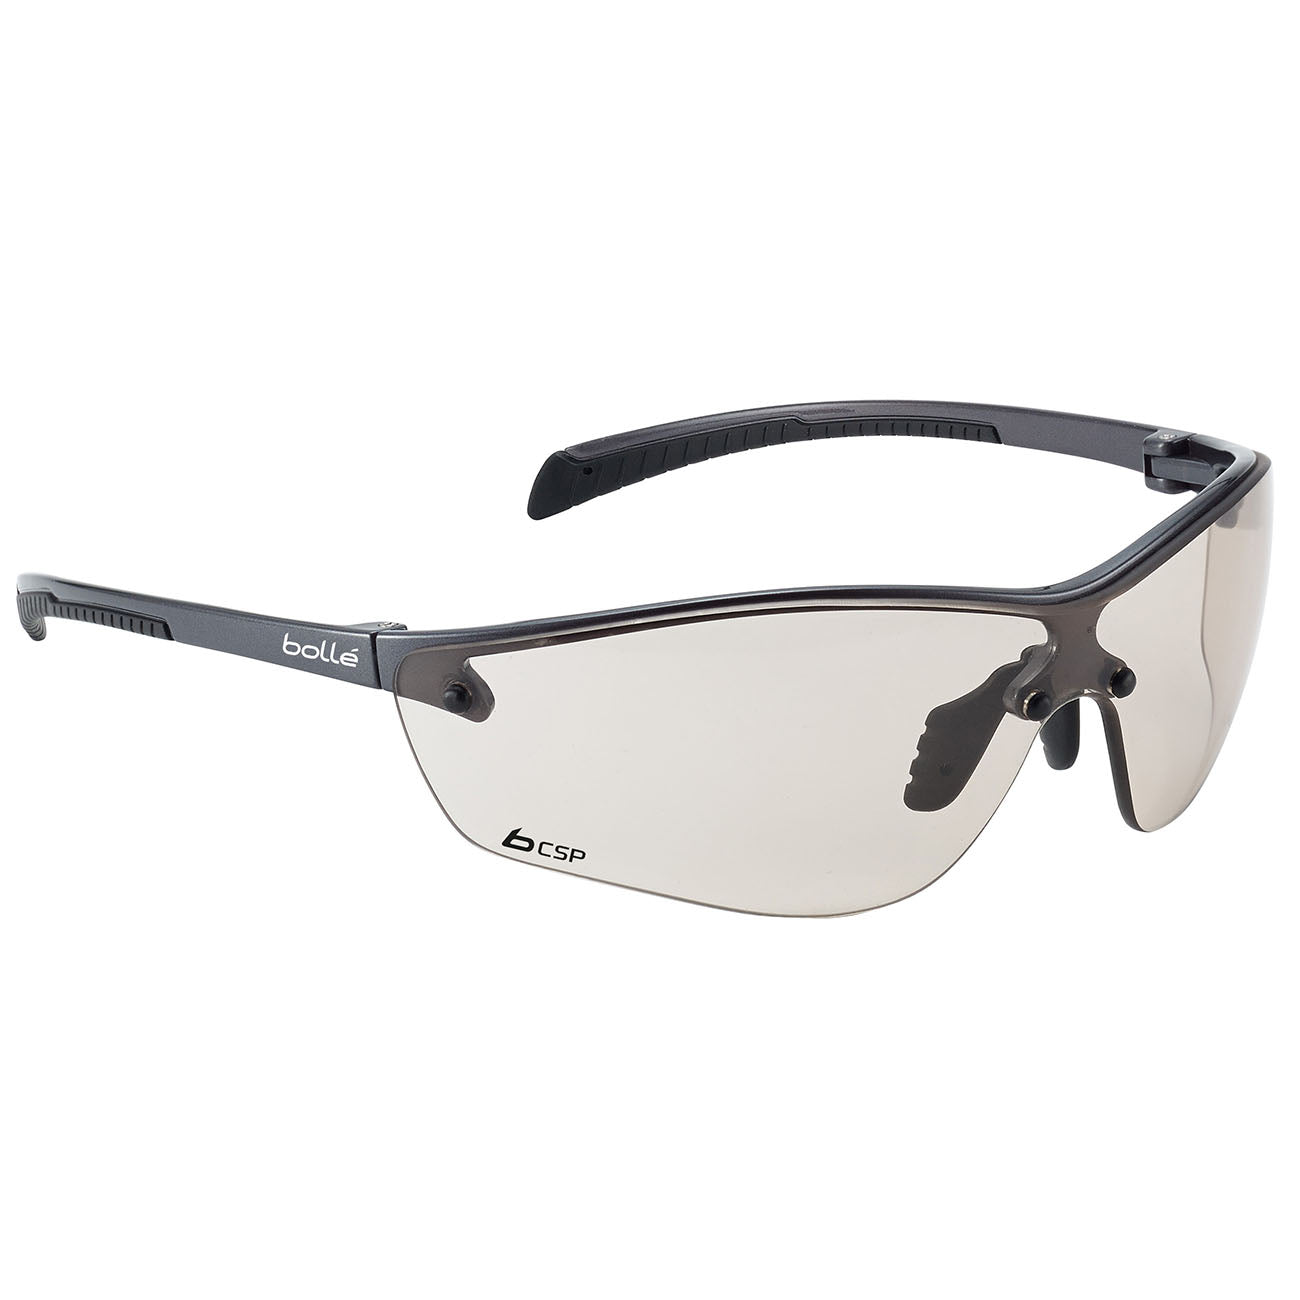 Bolle SILIUM+ SILPCSP Safety Glasses CSP Lens